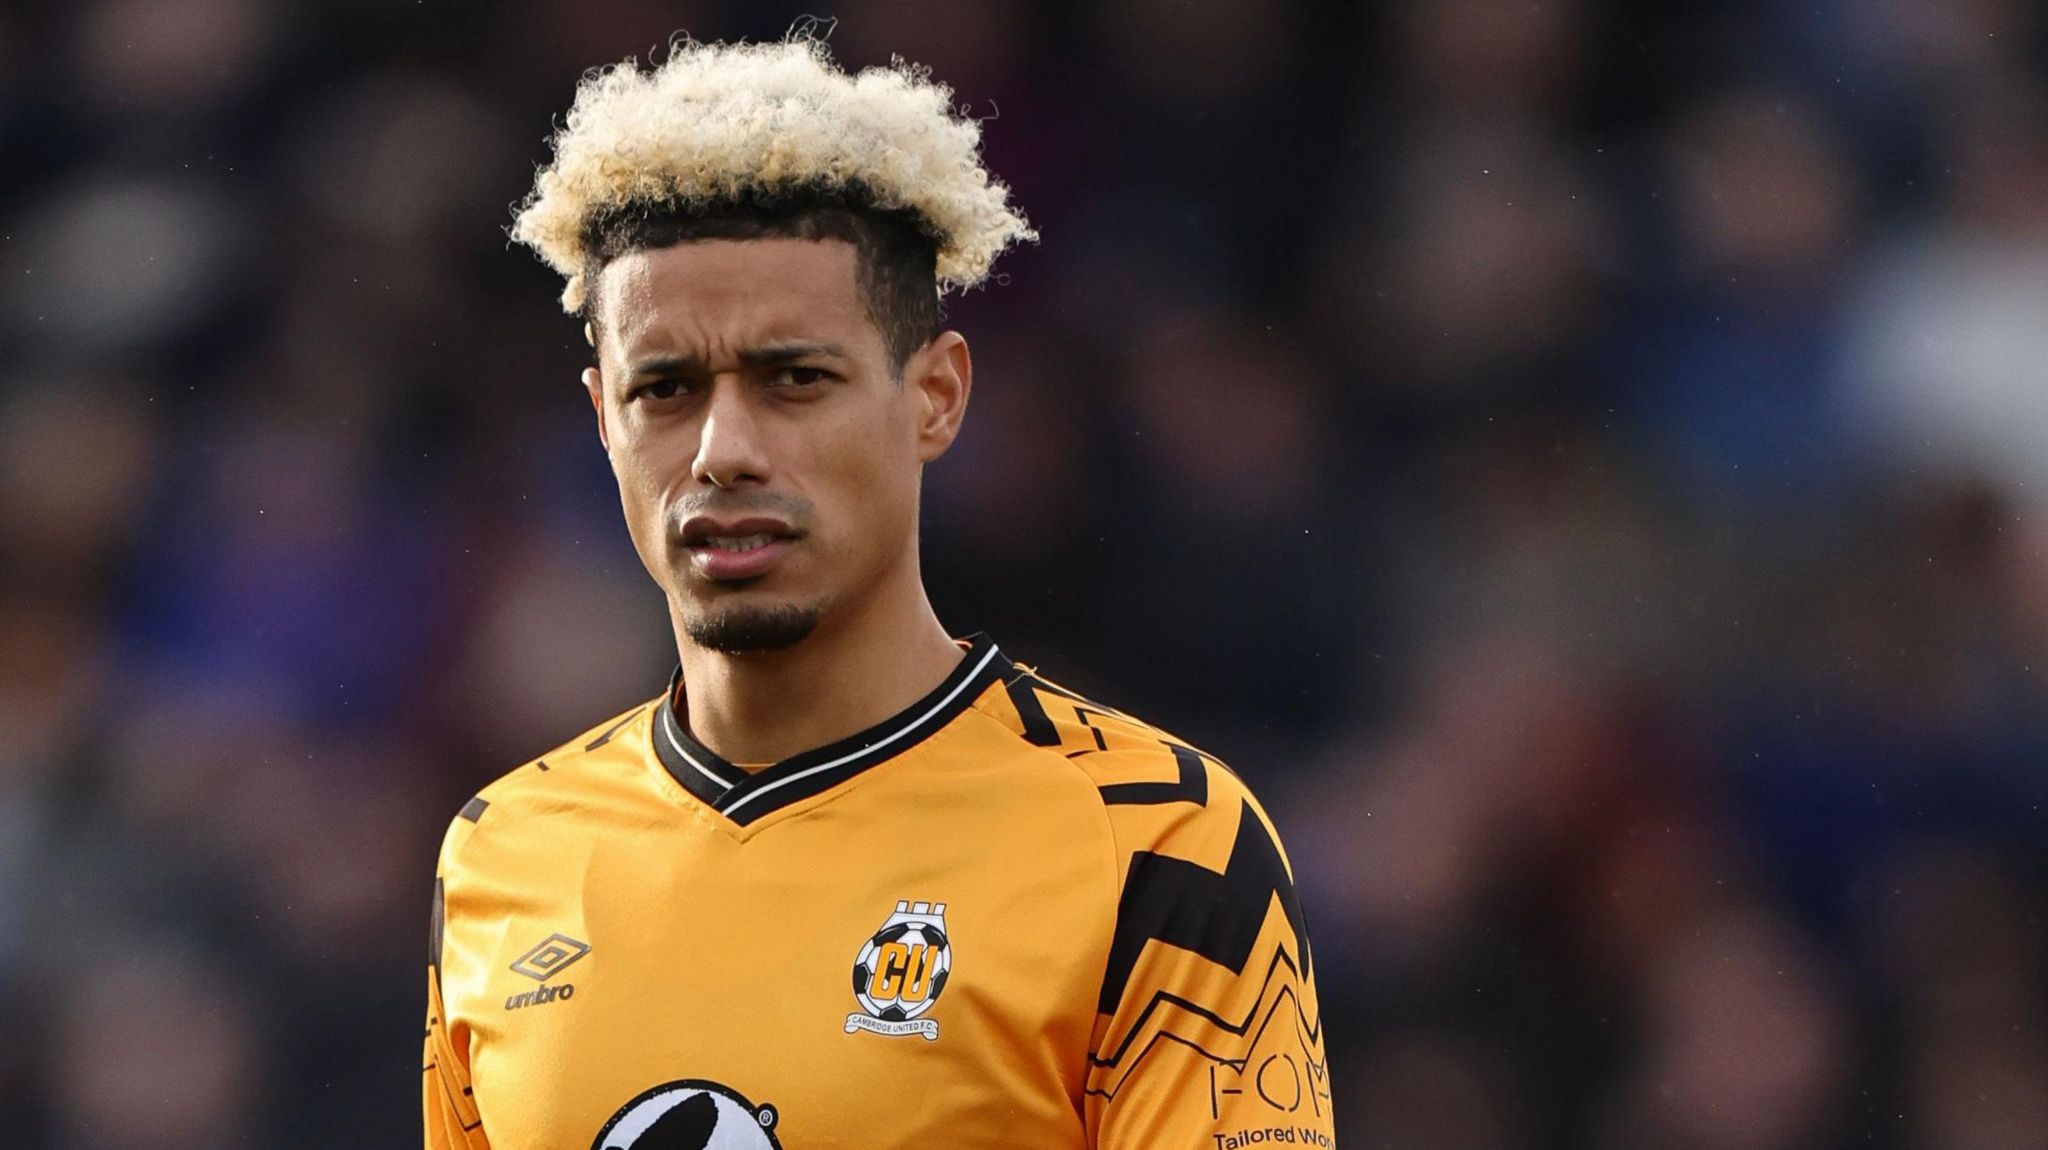 Lyle Taylor in action for Cambridge